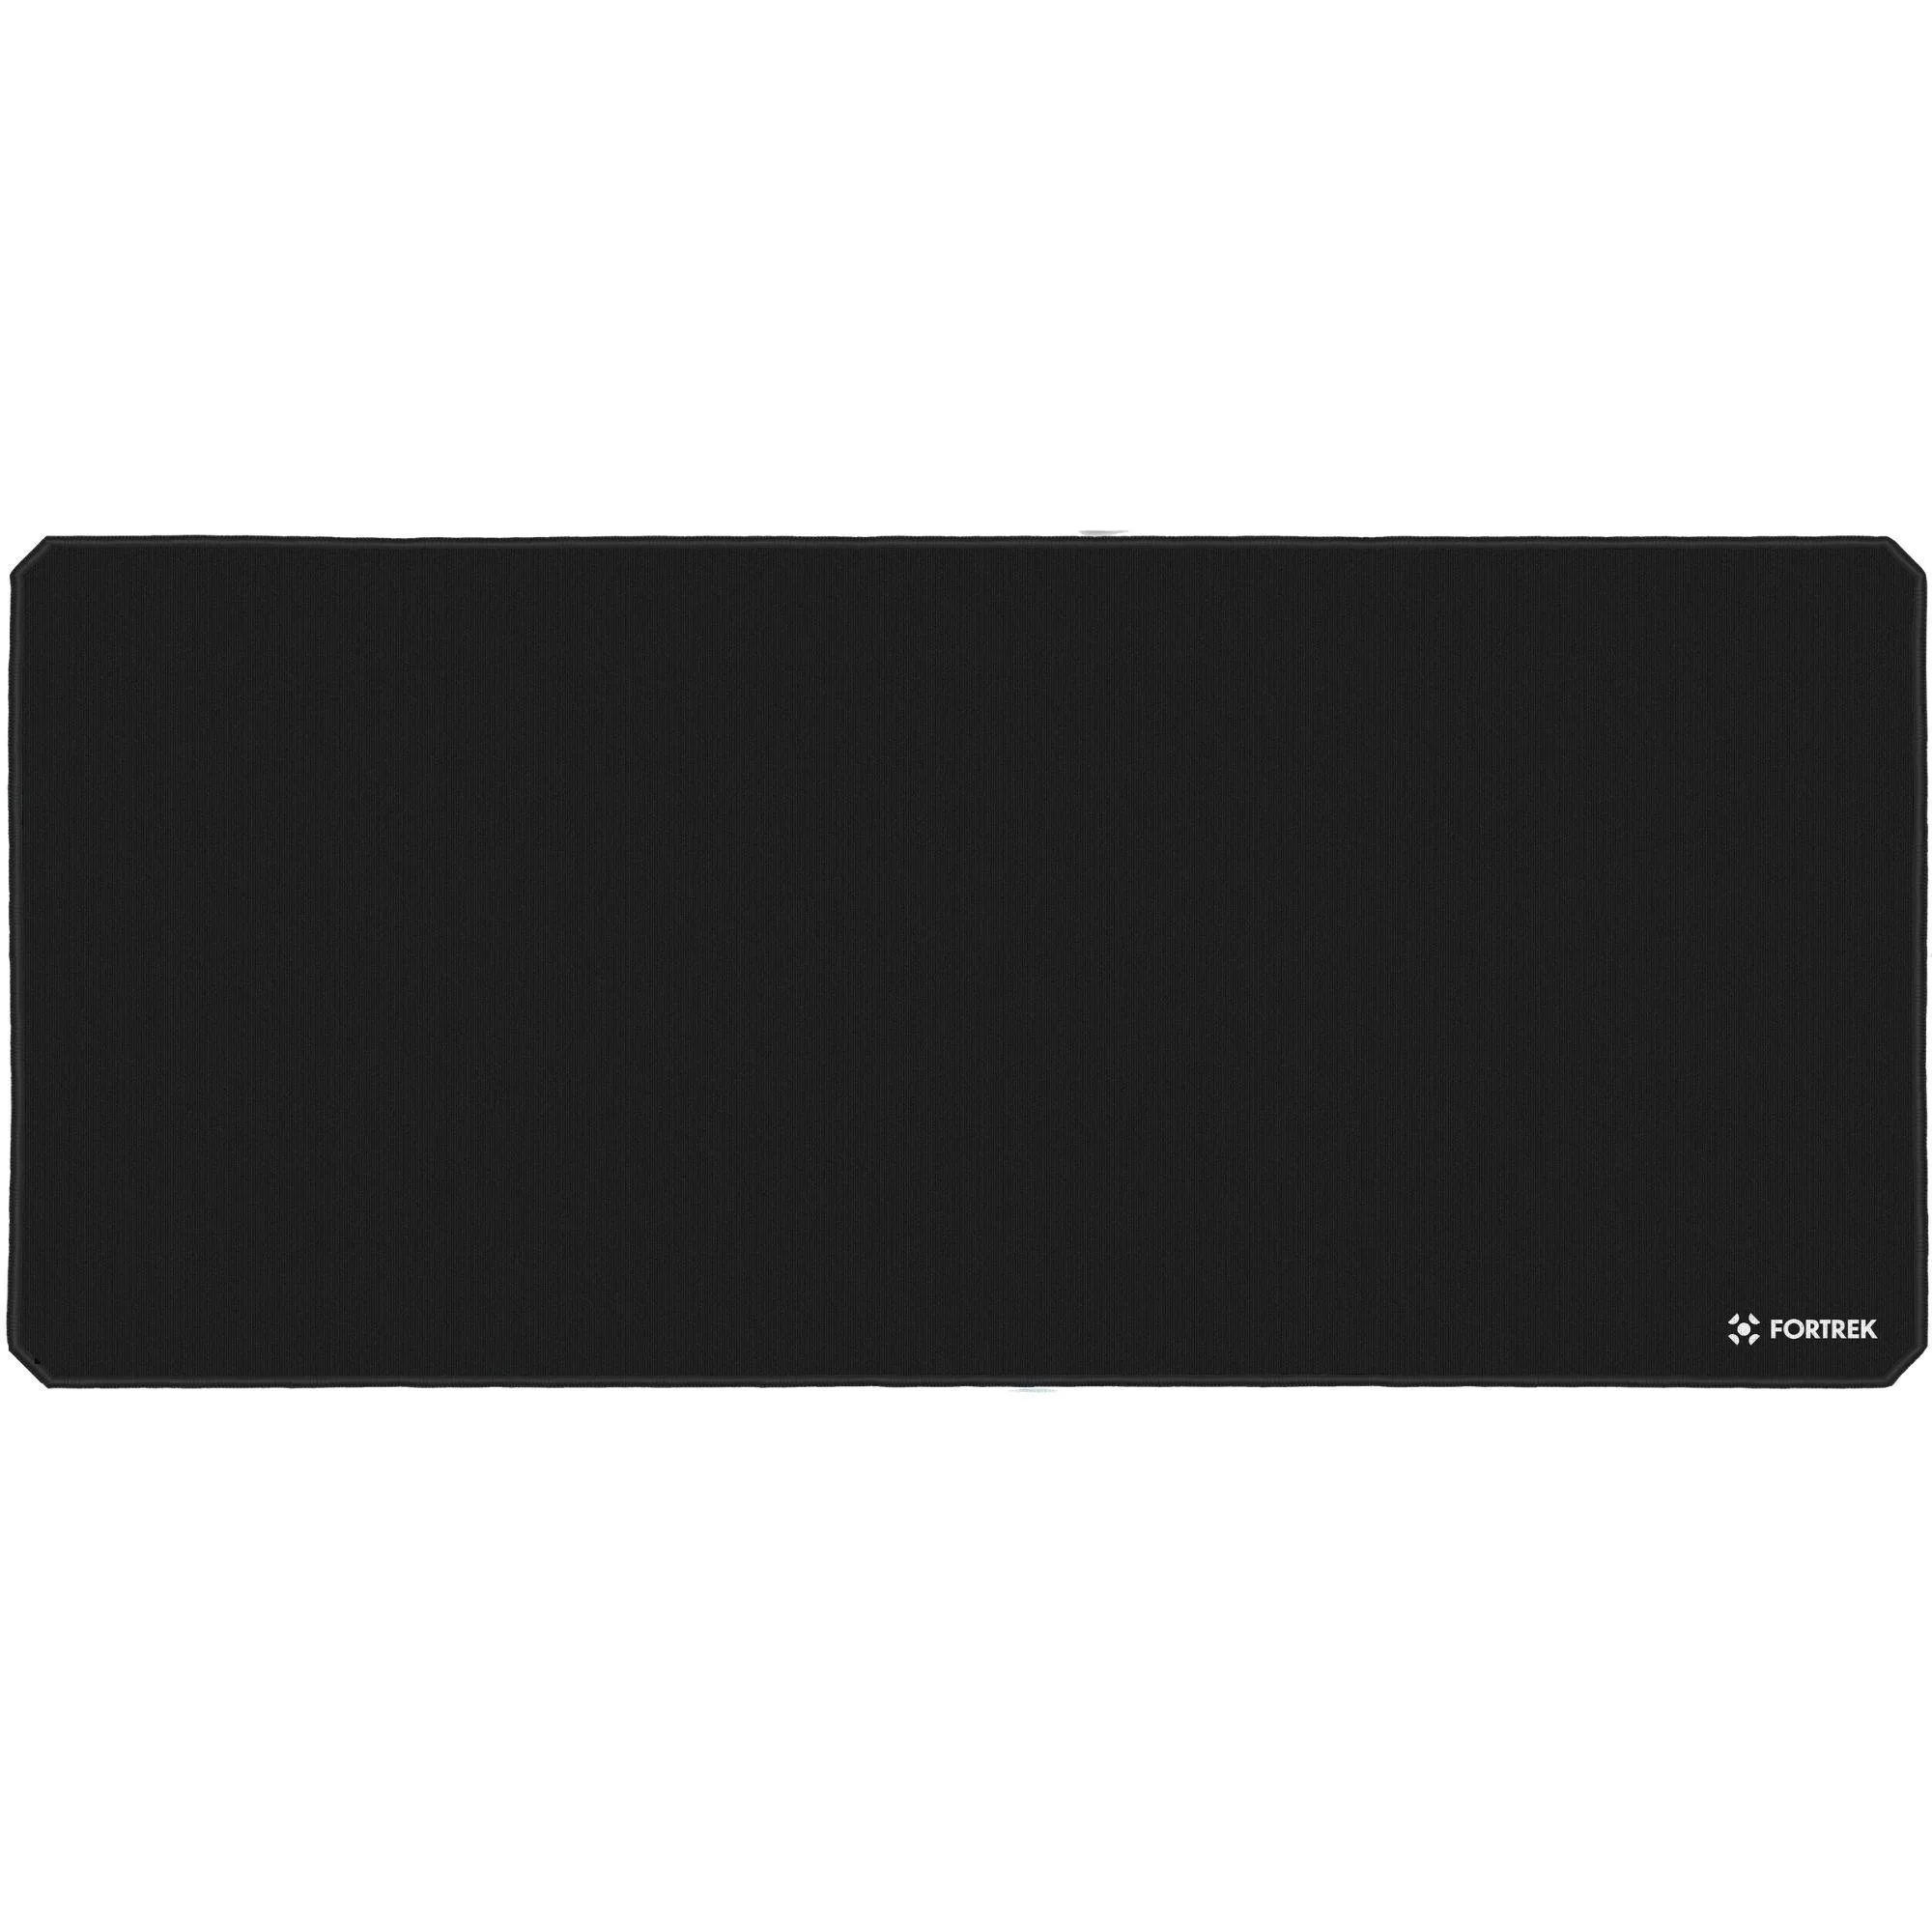 Mouse Pad Gamer Fortrek Speed MPG104 (900x400mm) Preto (77542)